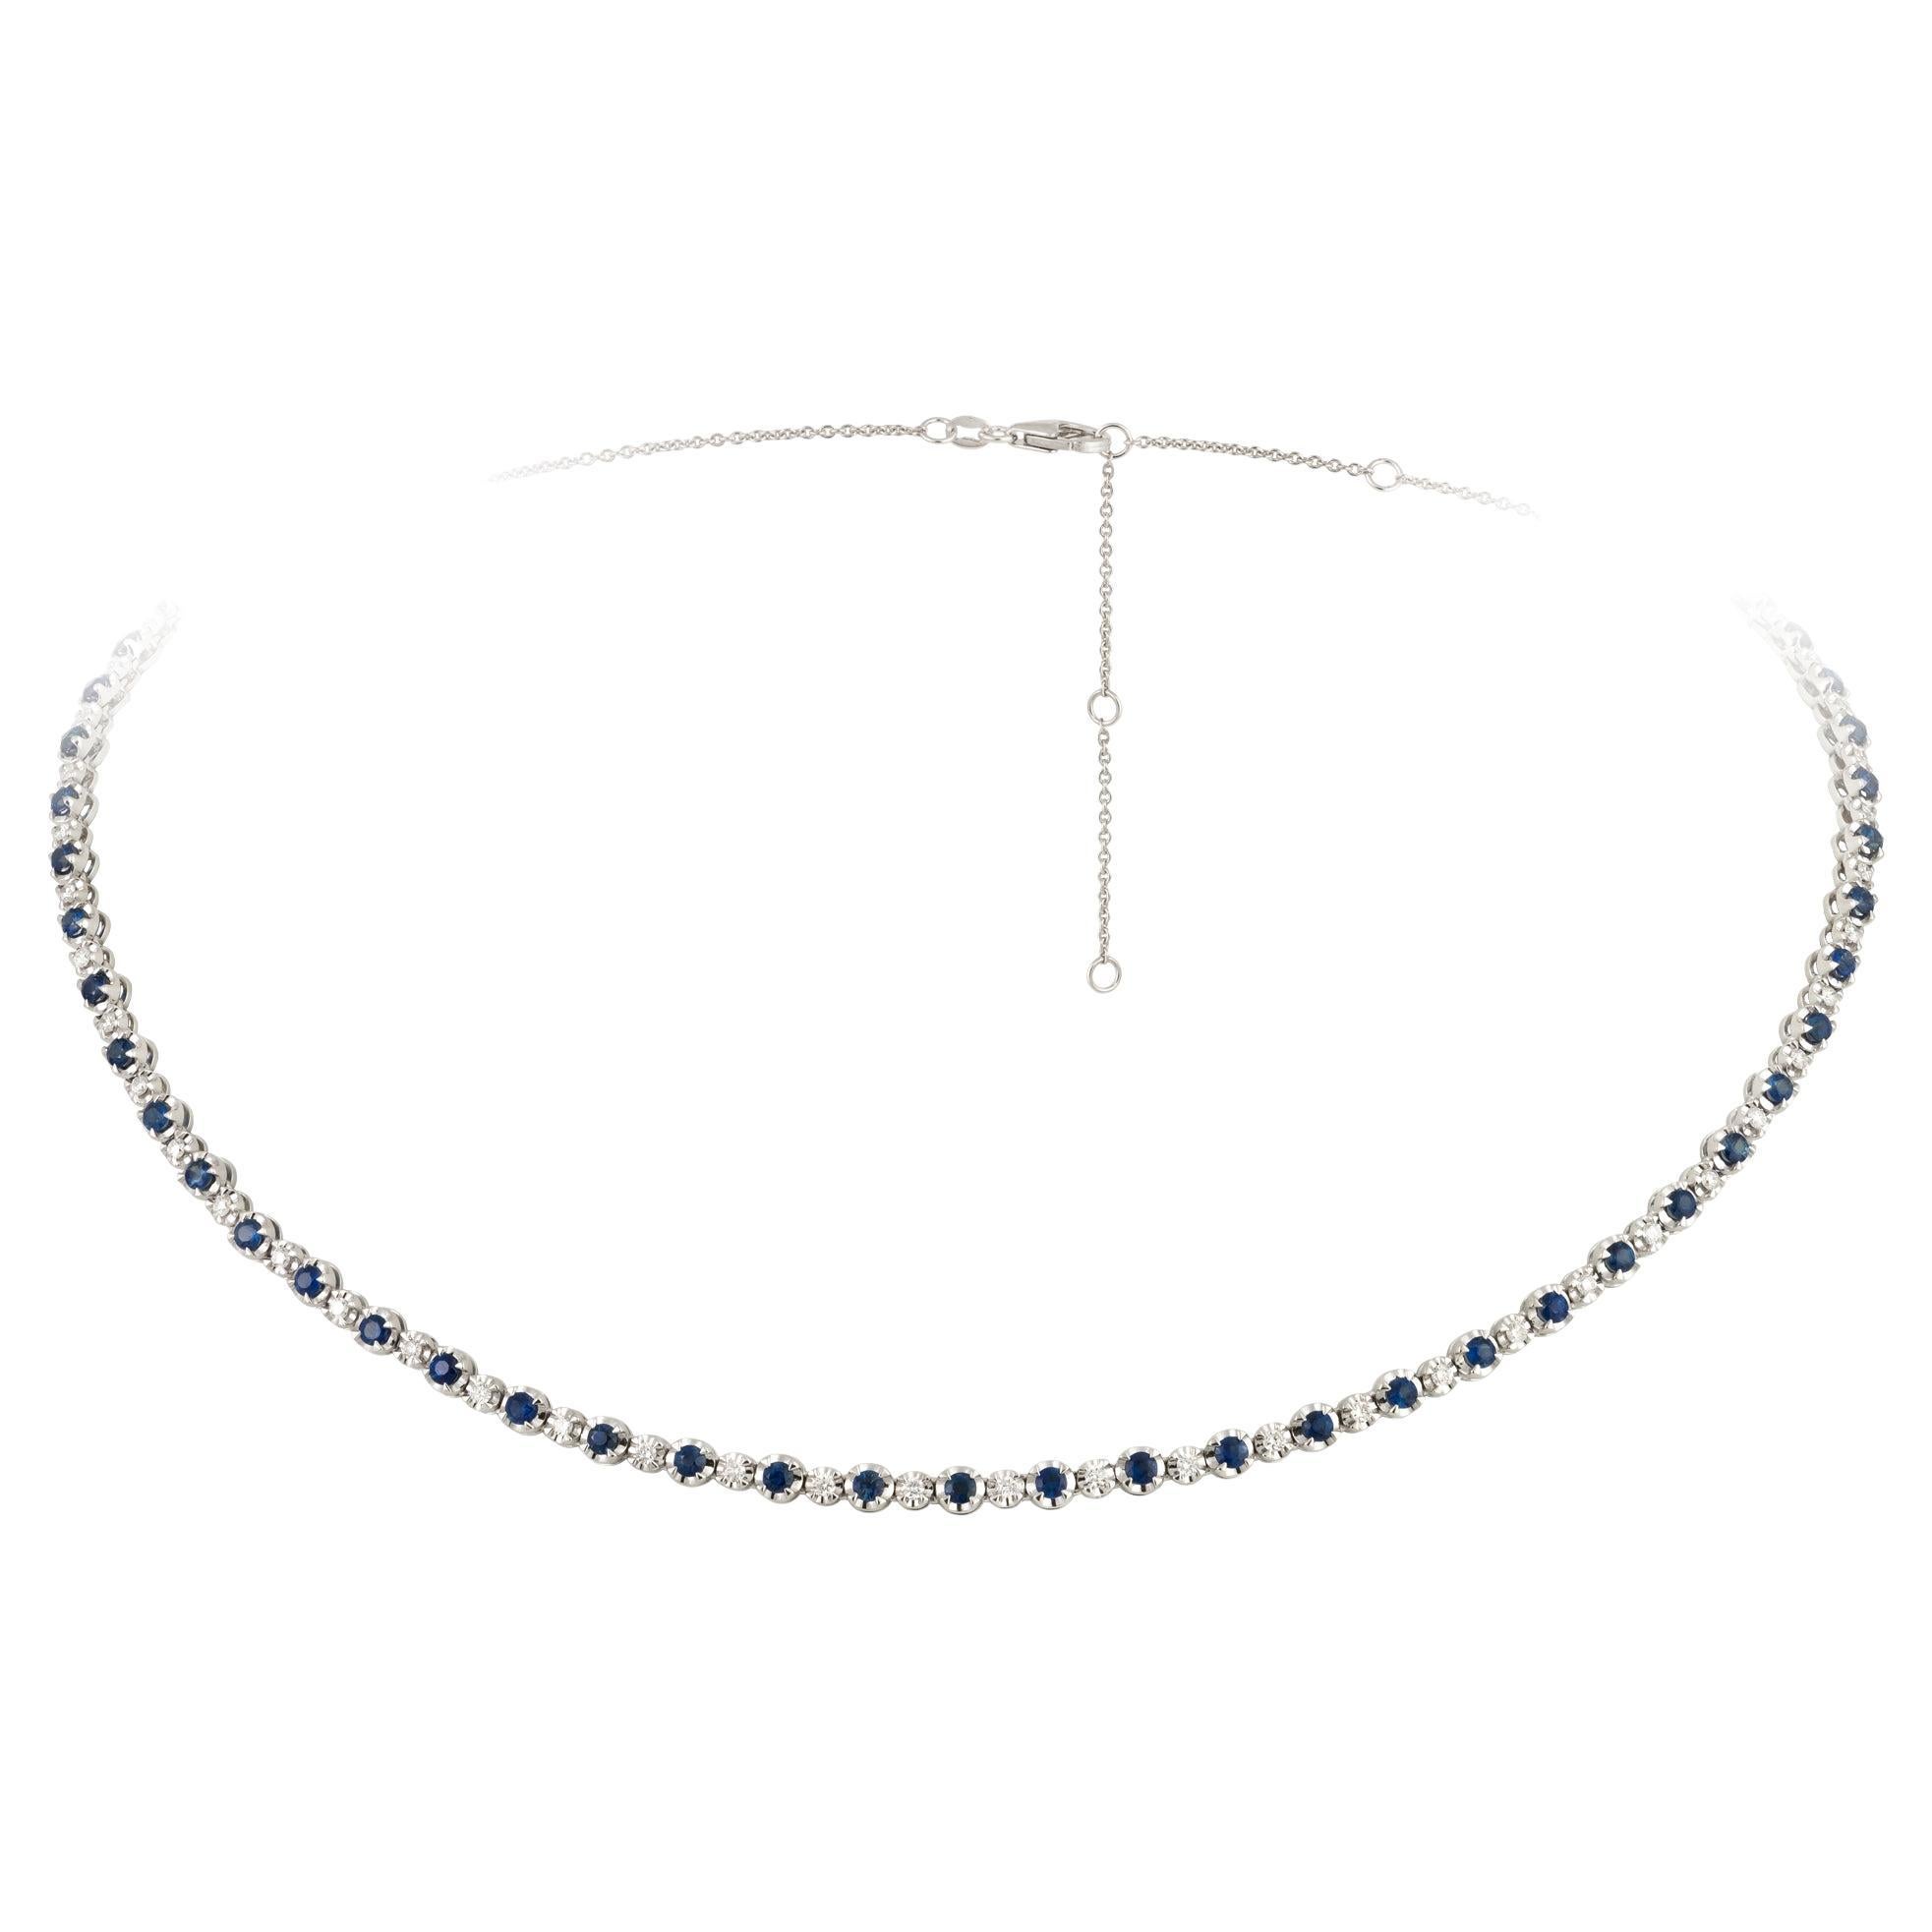 Fashion White Gold 18K Necklace Blue Sapphire Diamond for Her For Sale